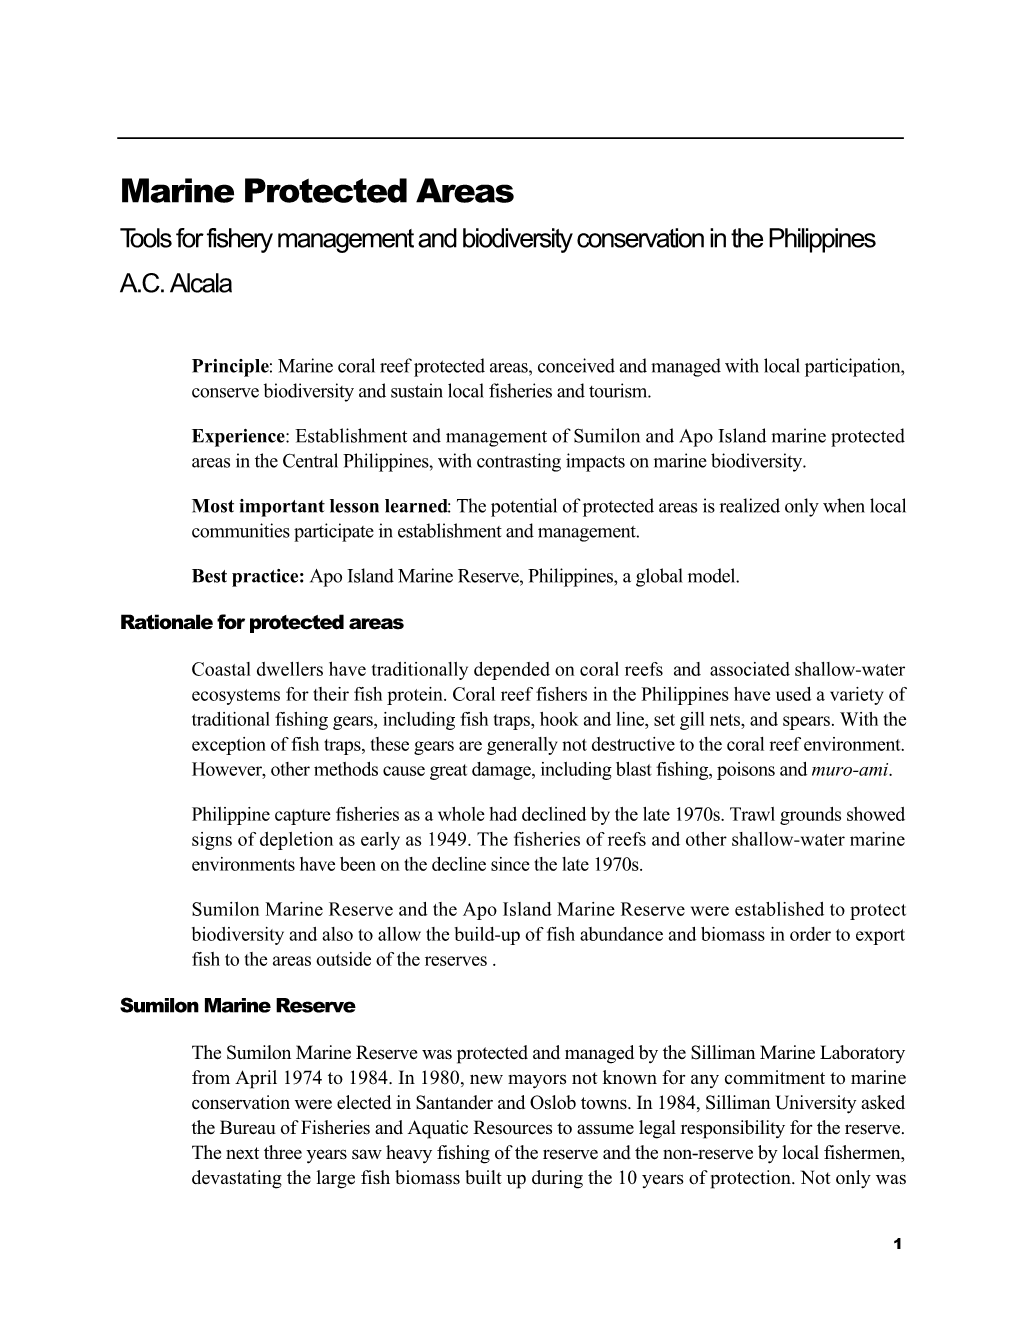 Marine Protected Areas Tools for Fishery Management and Biodiversity Conservation in the Philippines A.C